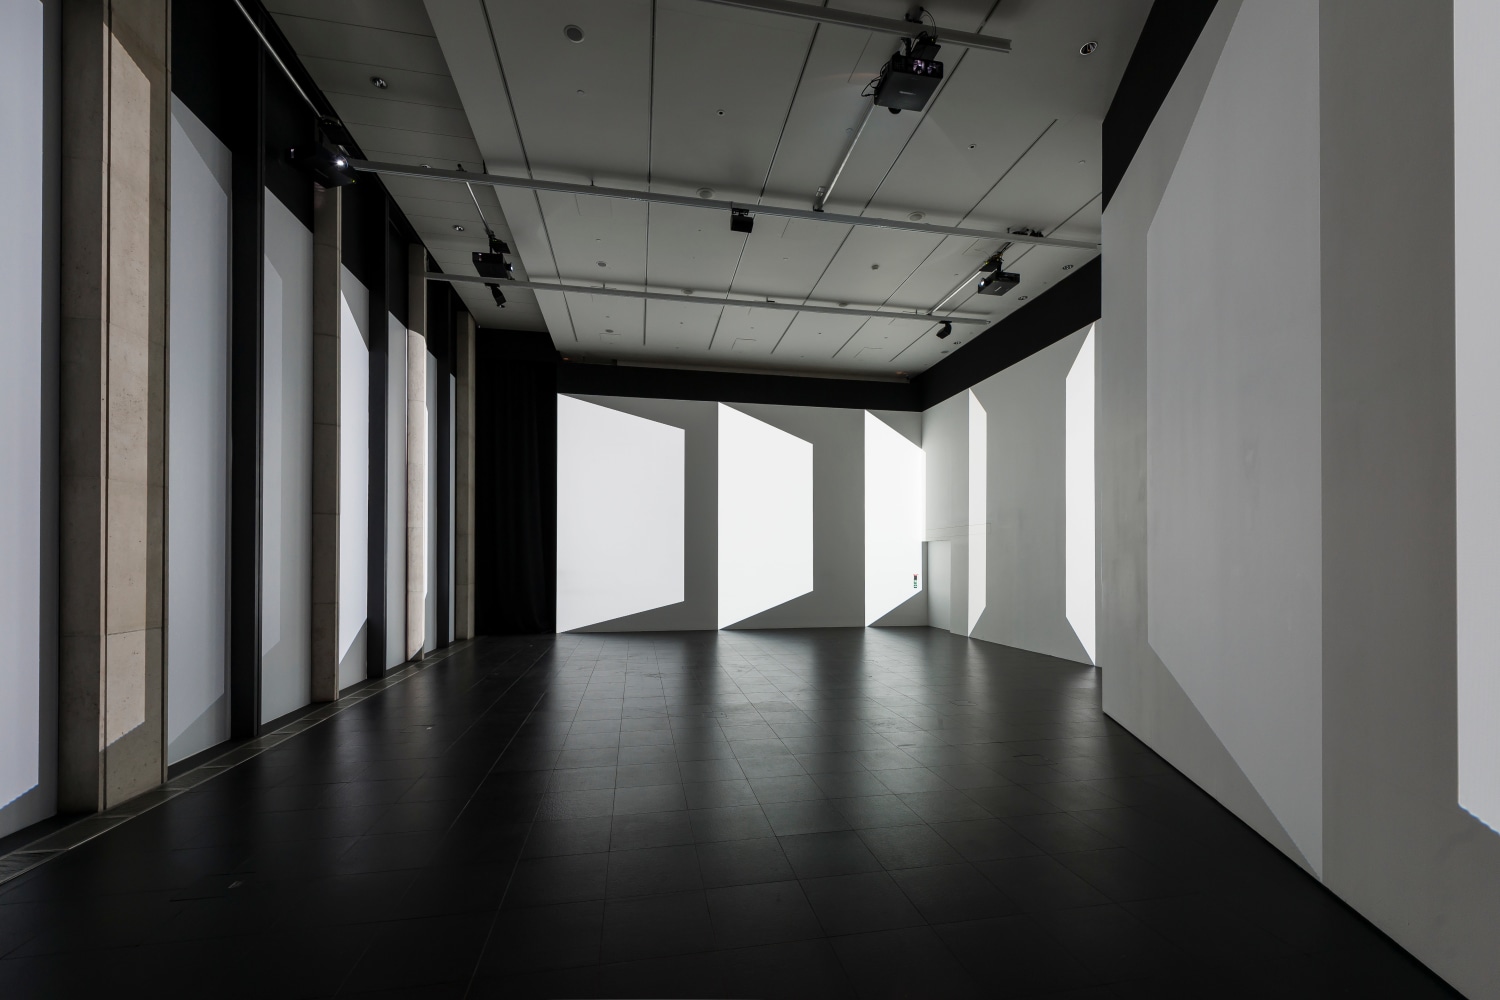 Charles Atlas
Glacier
Installation view at&amp;nbsp;Bloomberg Space, London, 2013